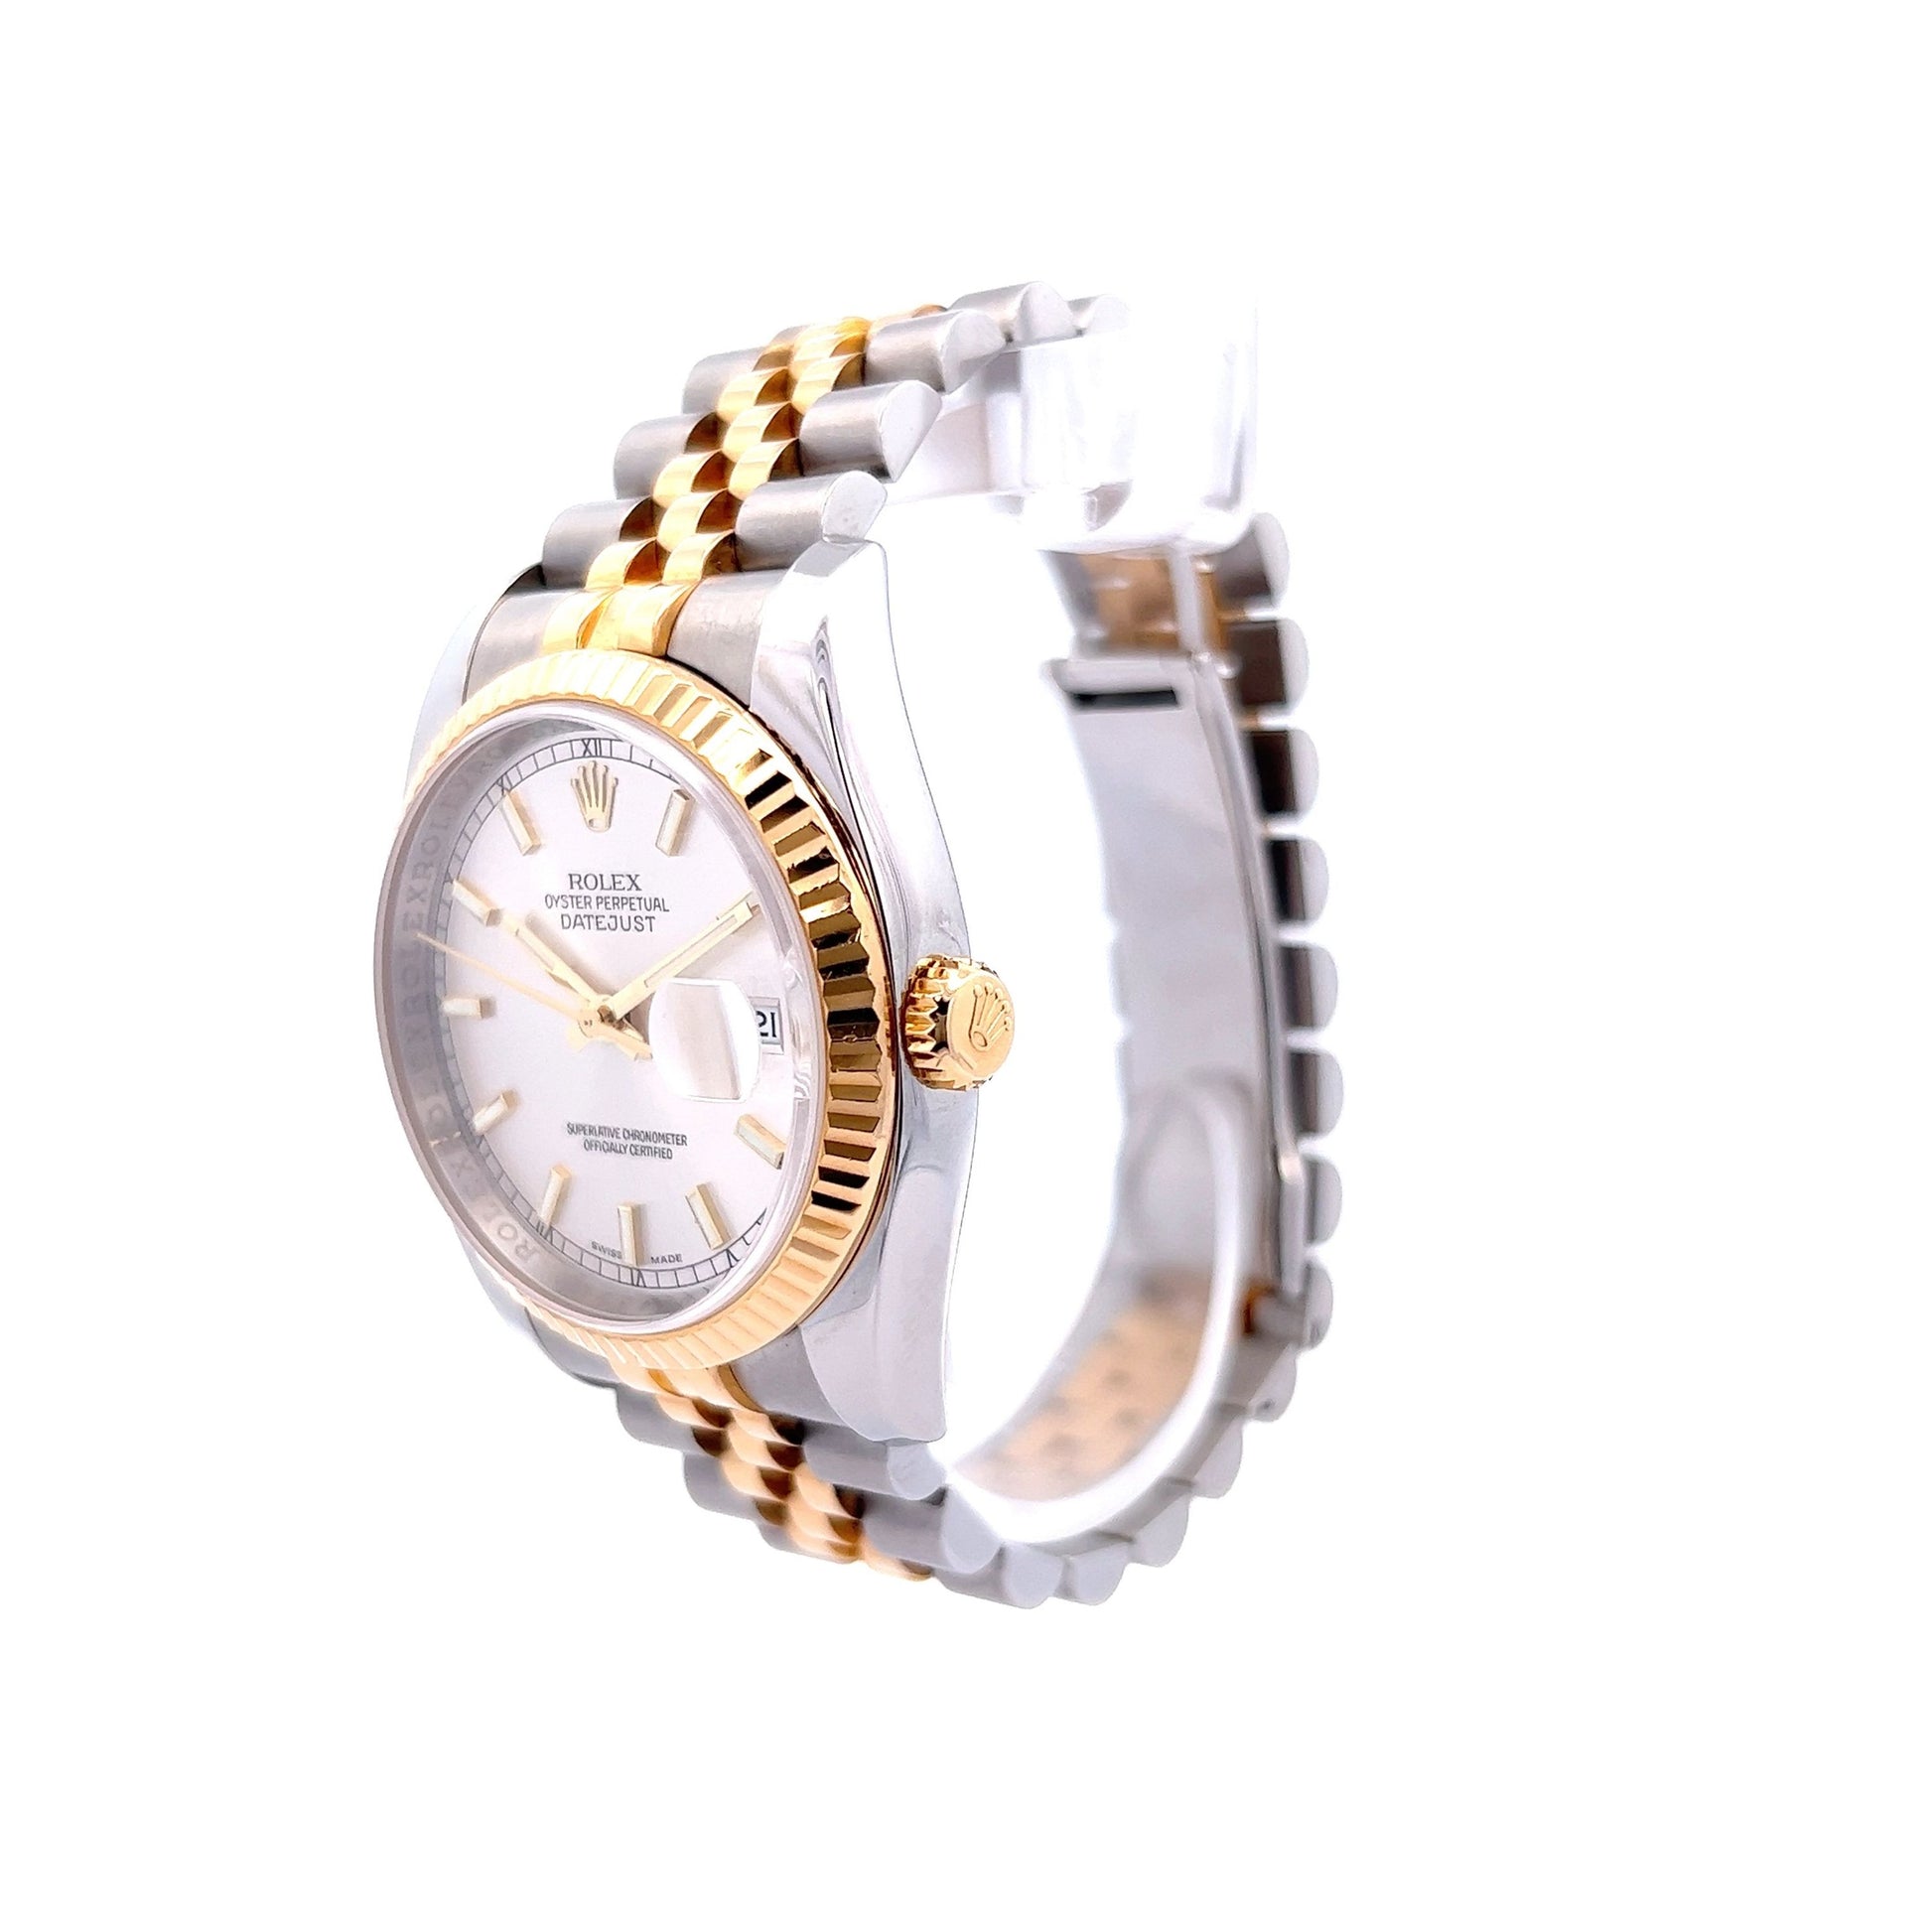 Rolex DateJust 116233 2 Tone Watch Gold Dial Automatic Watch